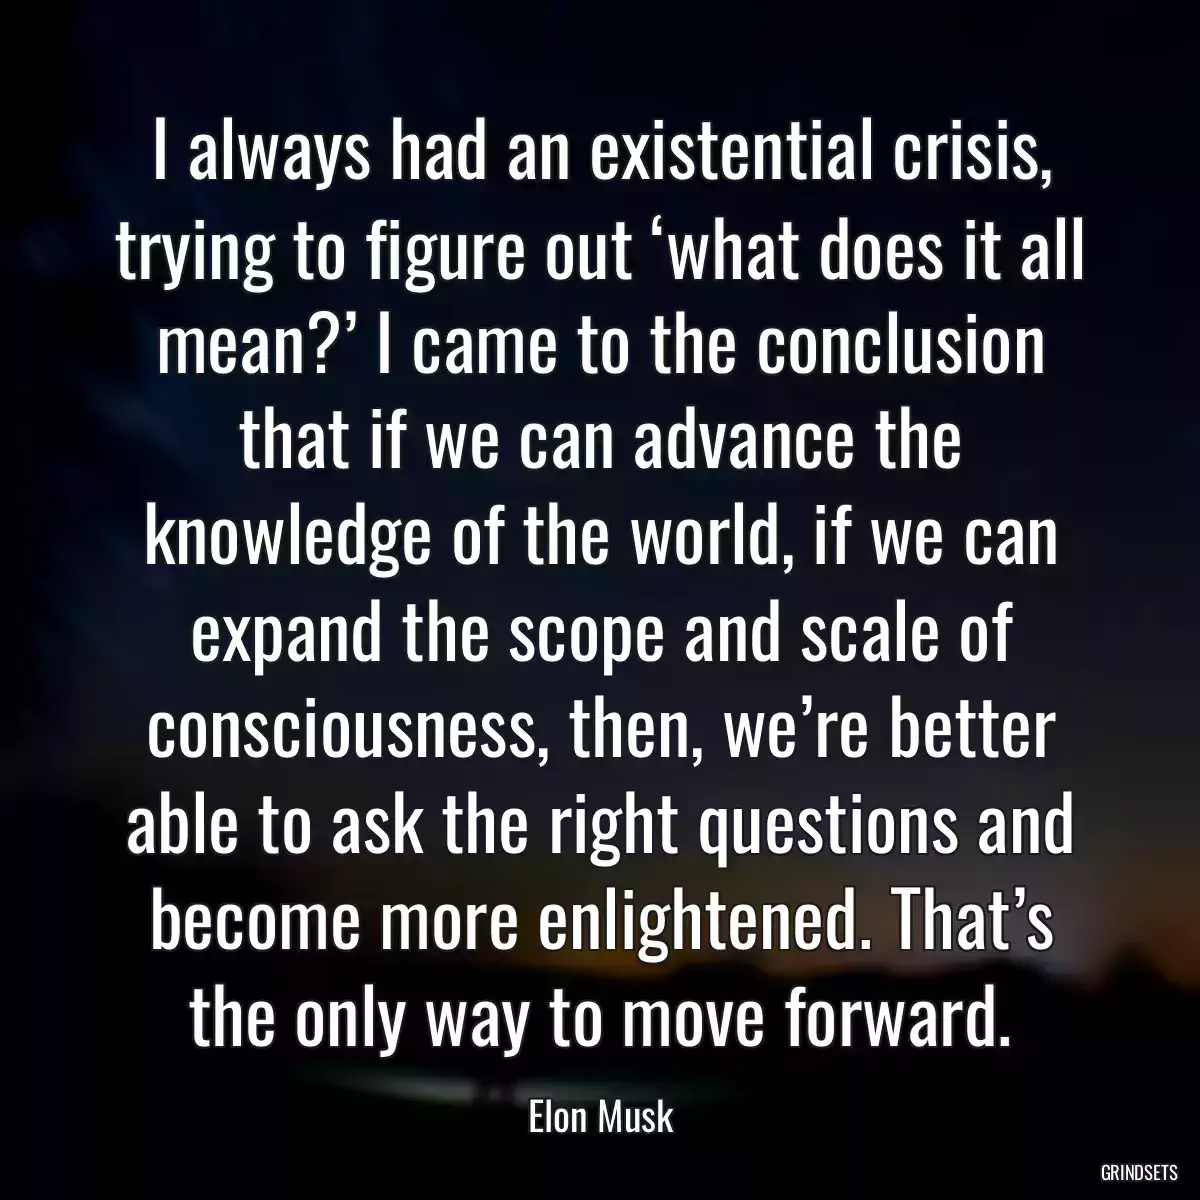 I always had an existential crisis, trying to figure out ‘what does it all mean?’ I came to the conclusion that if we can advance the knowledge of the world, if we can expand the scope and scale of consciousness, then, we’re better able to ask the right questions and become more enlightened. That’s the only way to move forward.